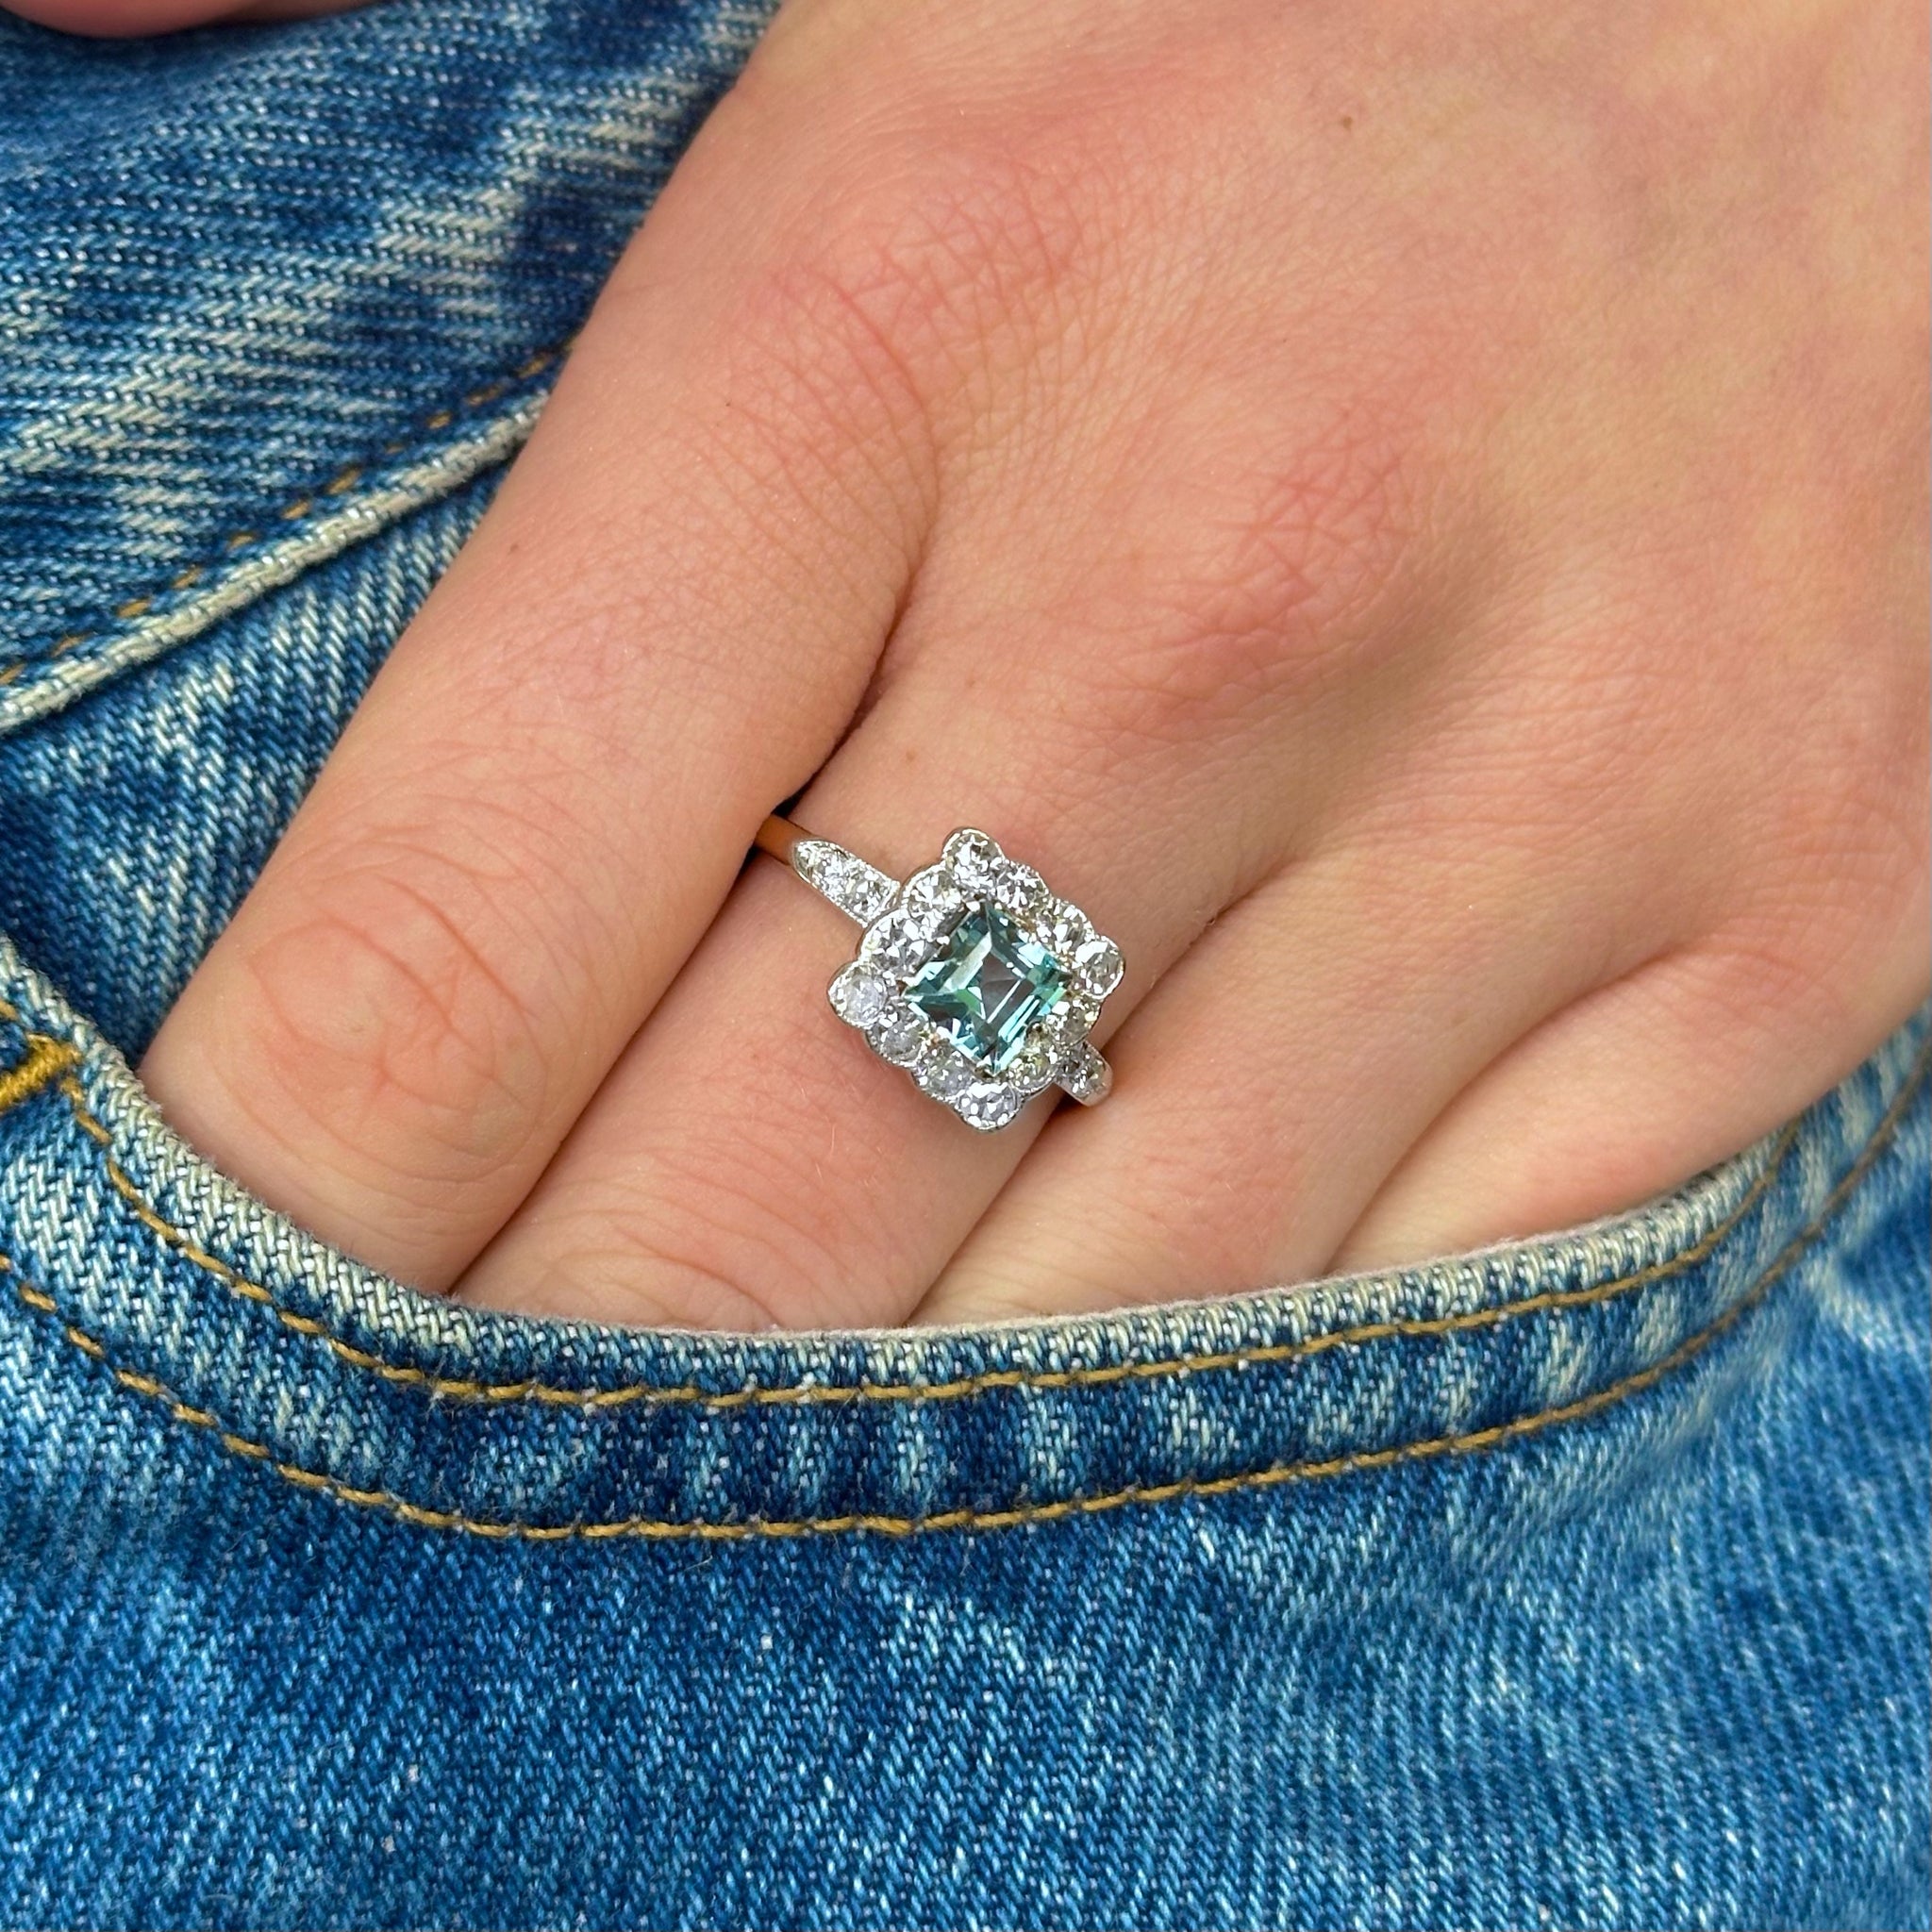 Antique, Edwardian Aquamarine and Diamond Square Cluster Ring, worn on hand in pocket of jeans